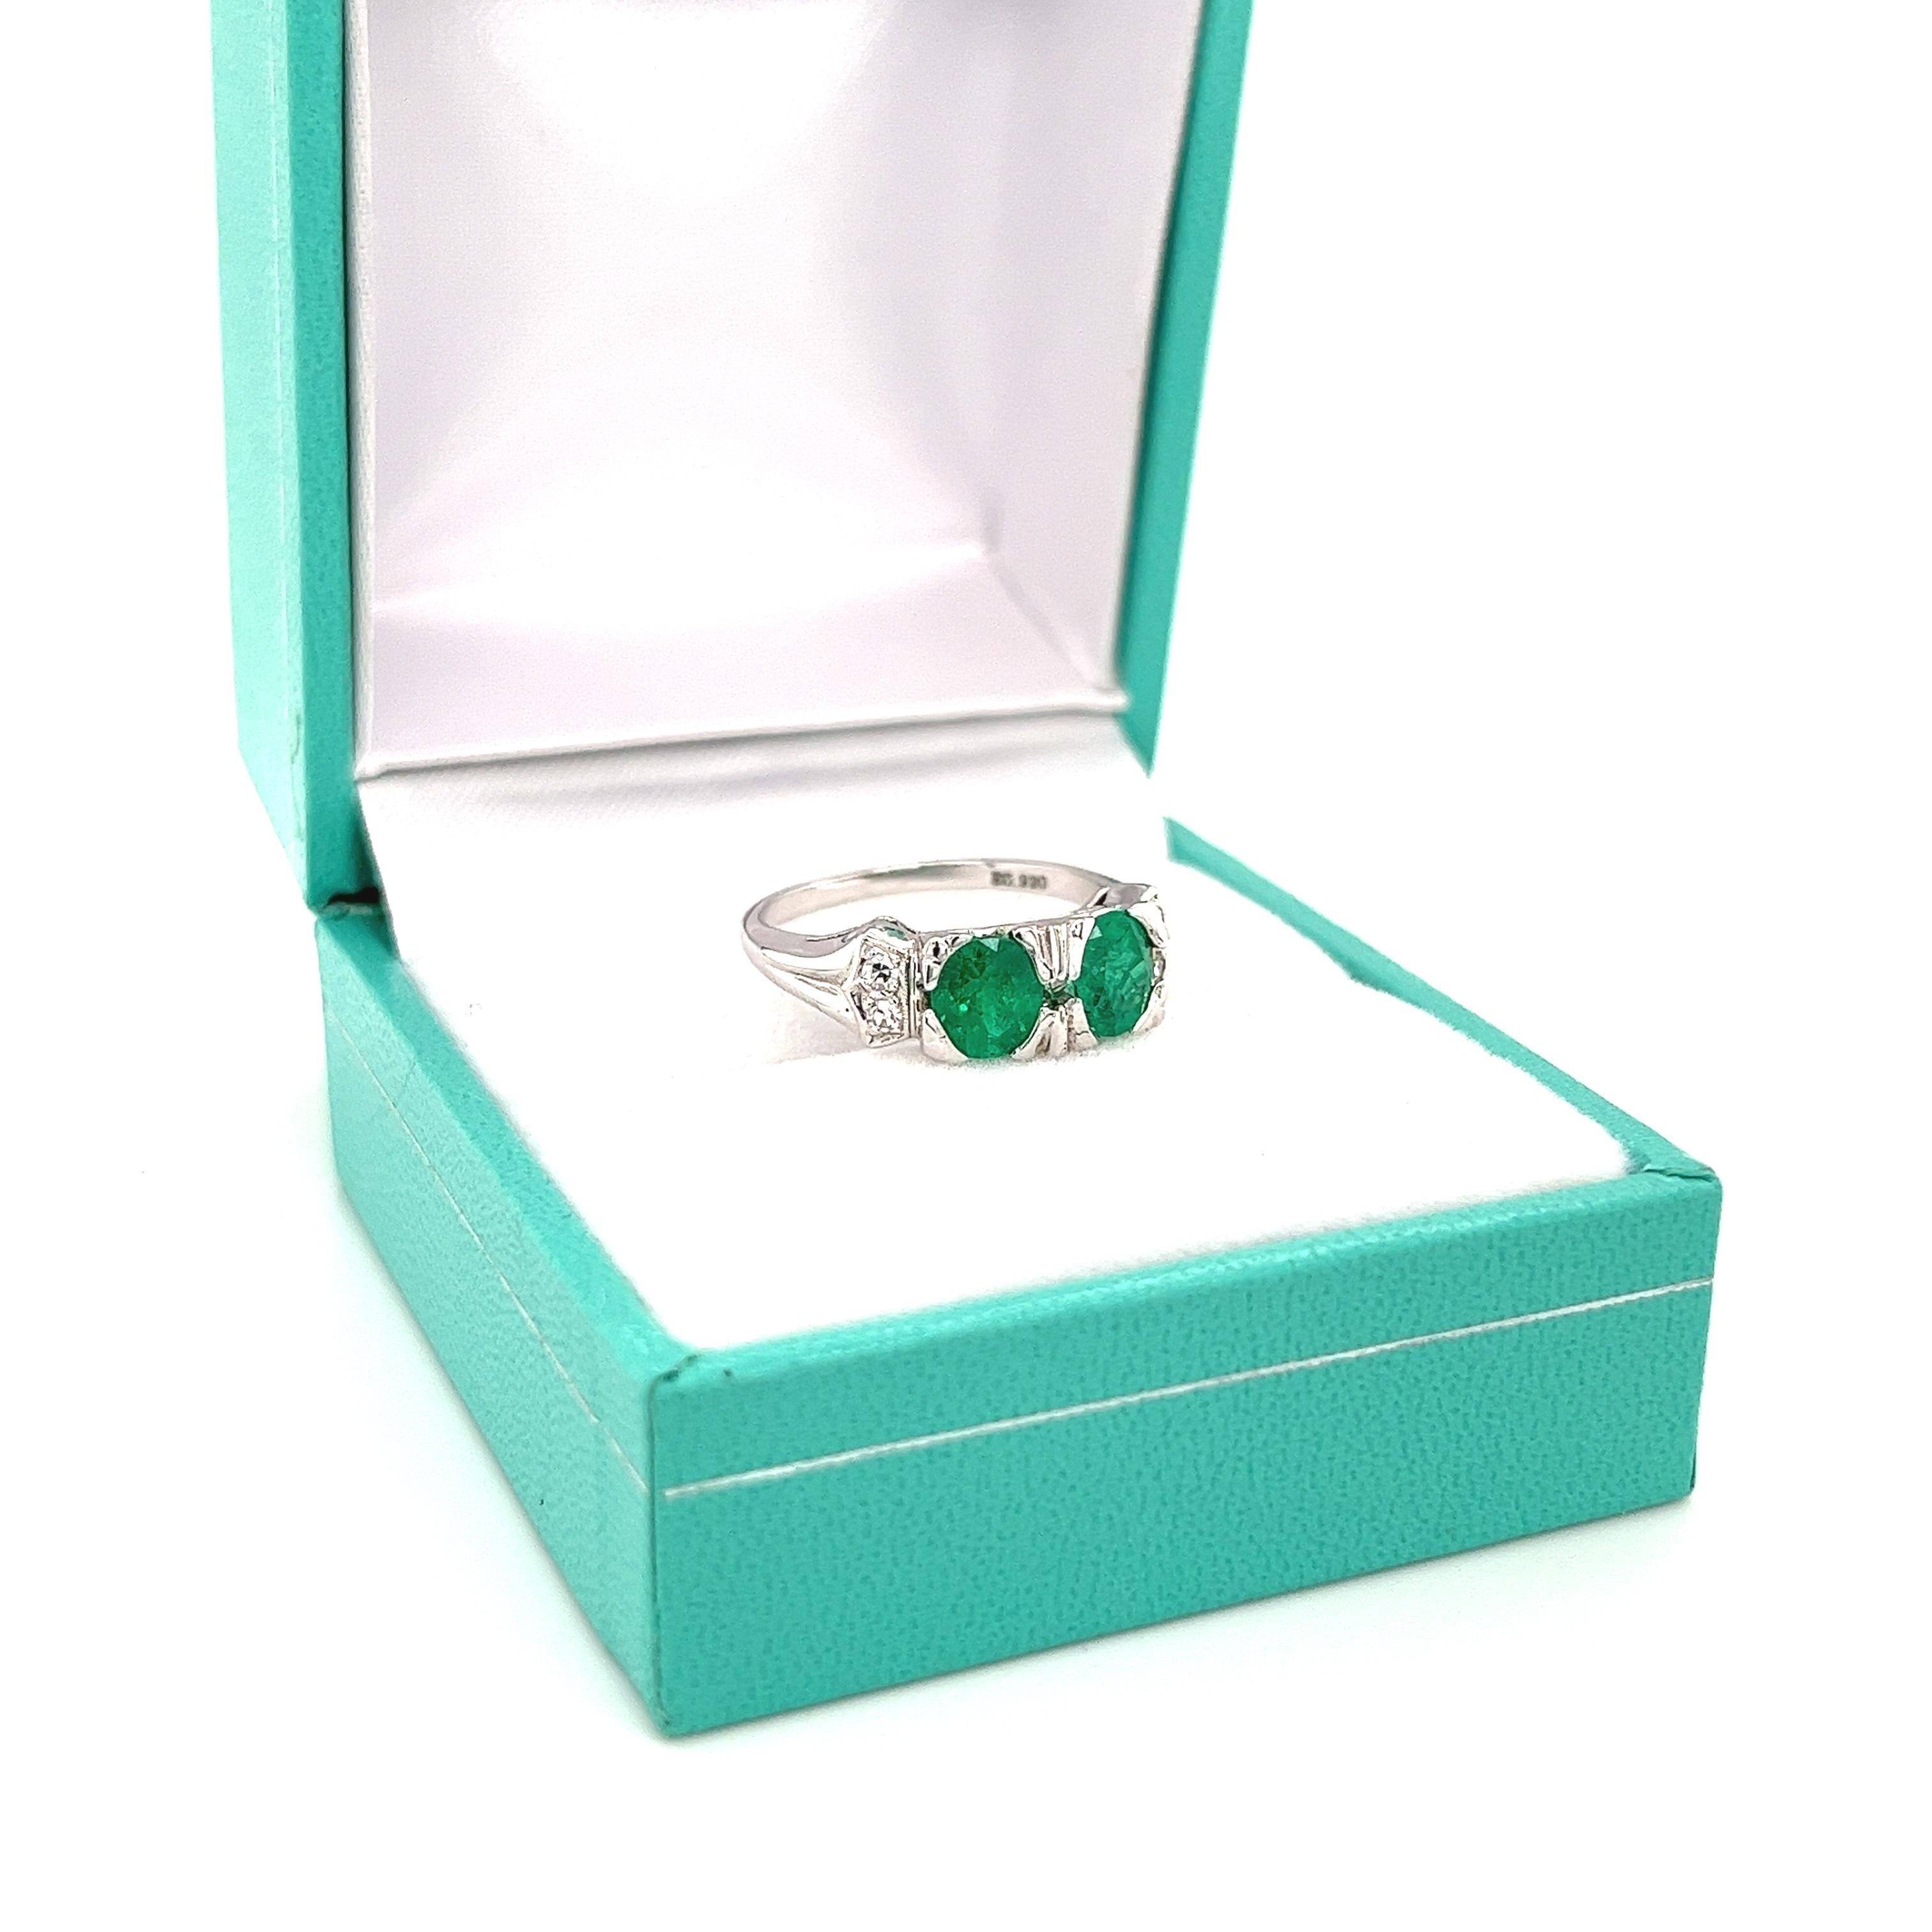 Art Deco inspired Colombian Emerald ring of 0.92 carats. The emerald carat is engraved on the inside of the ring setting. The Emeralds are half-bezel tension set in 18k solid white gold. The Half bezel mounting the emeralds on the face is 5.7mm in